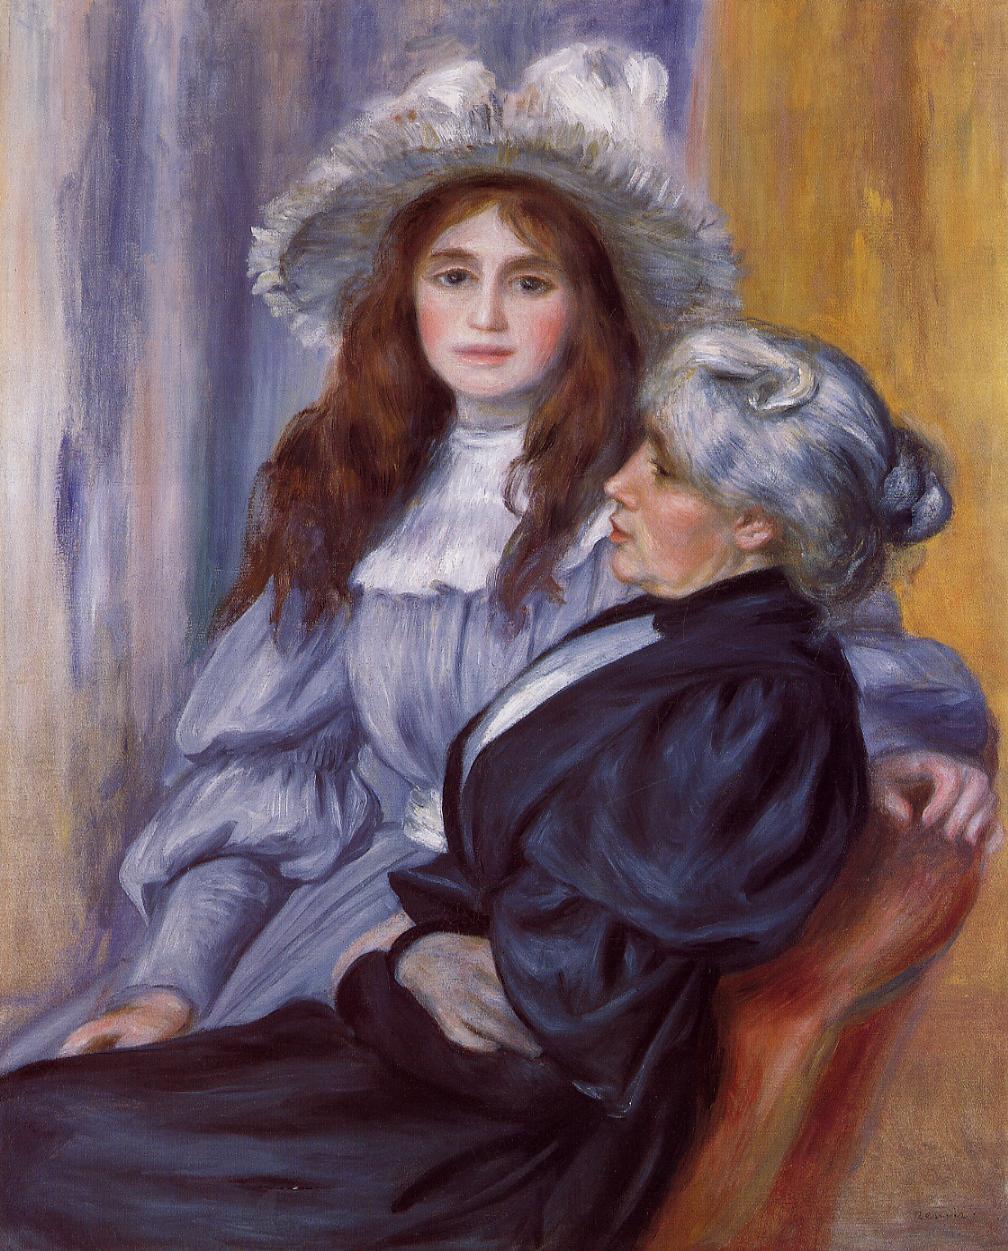 Berthe Morisot and Her Daughter Julie Manet by Pierre-Auguste Renoir - 1894 - - private collection